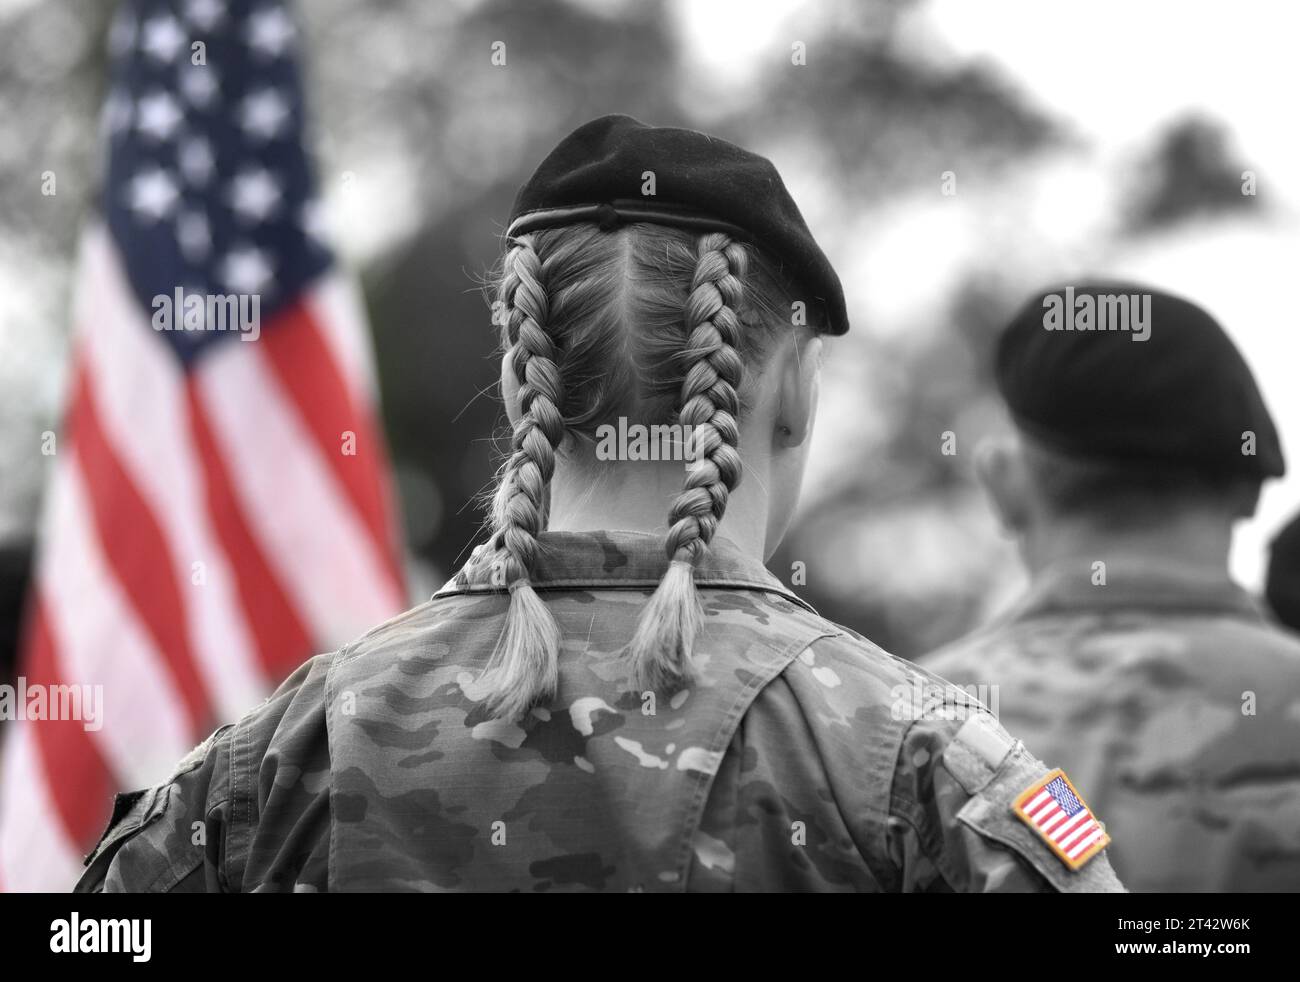 Women in the US Army. Military forces of the United States of America. Memorial day. Veterans Day. Stock Photo